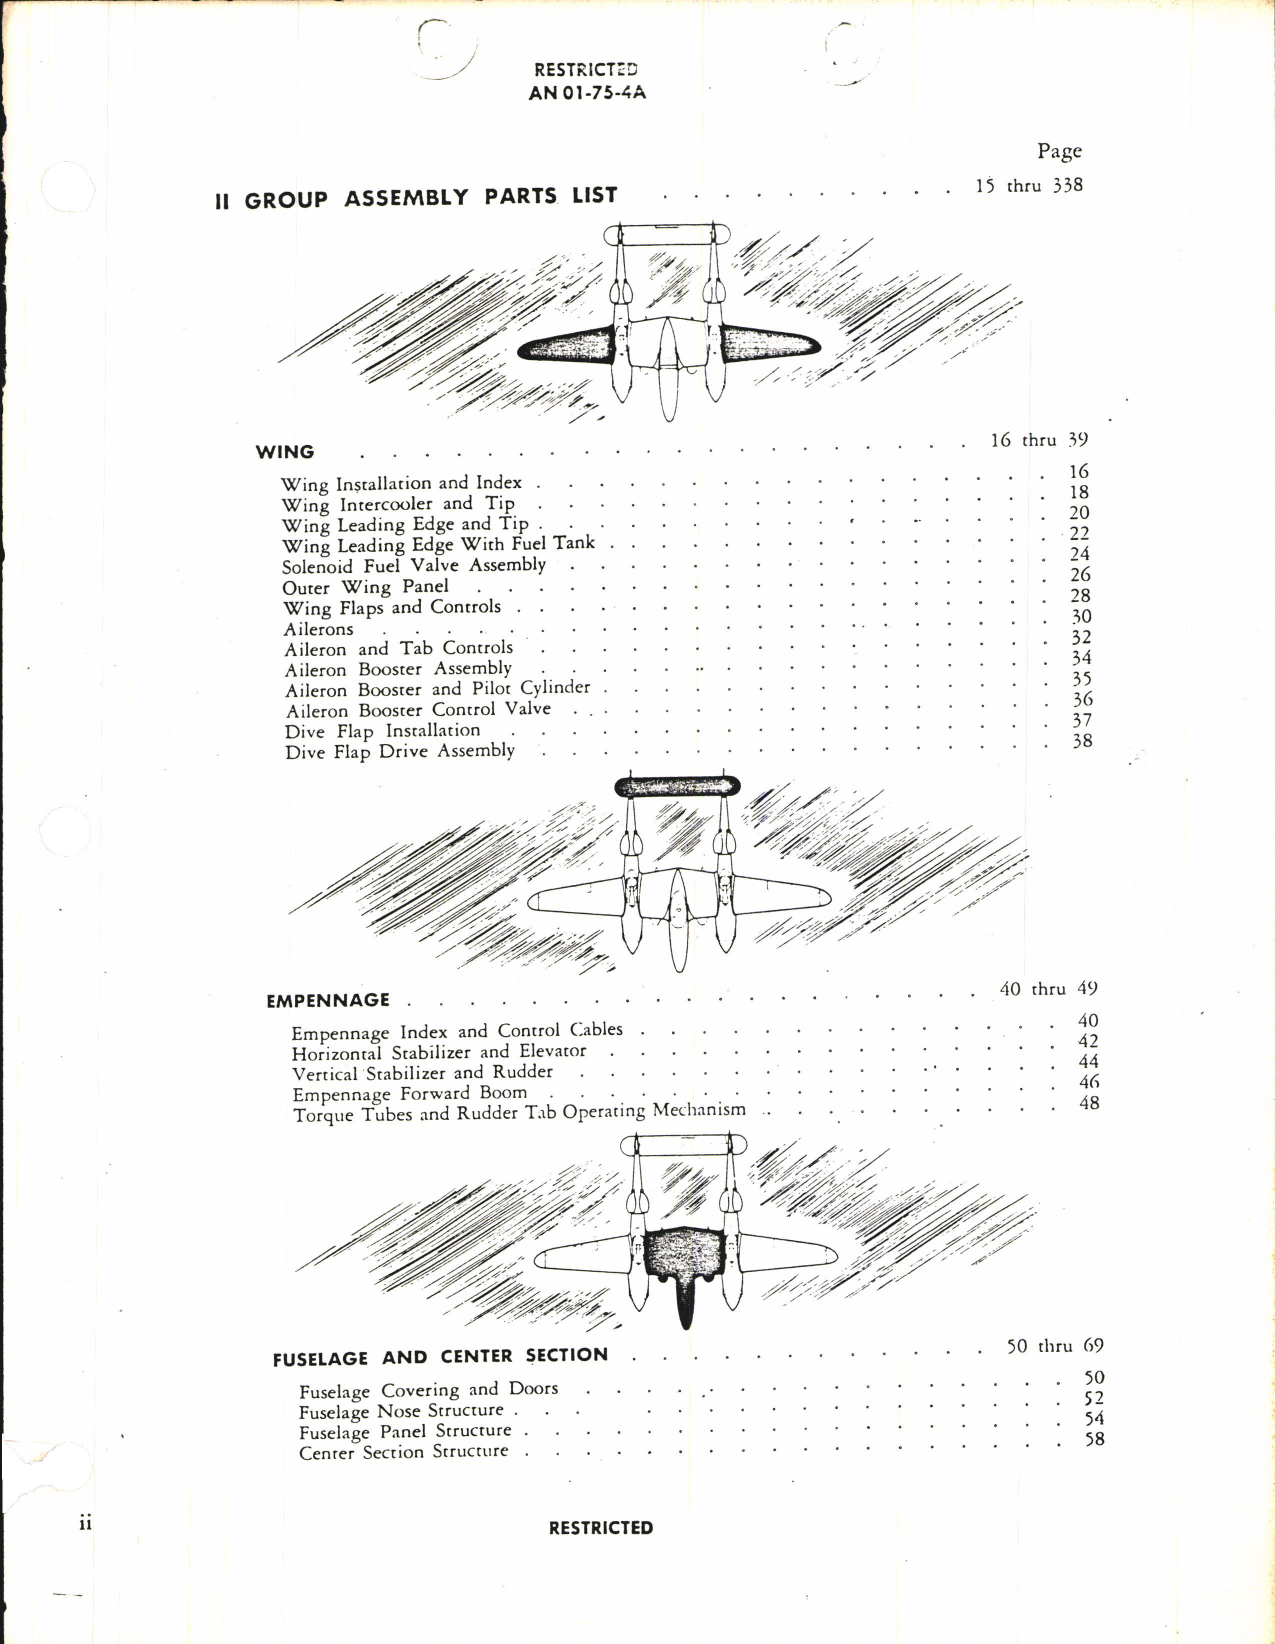 Sample page 7 from AirCorps Library document: Parts Catalog for P-38H, P-38J, P-38L, and F-5B Airplanes